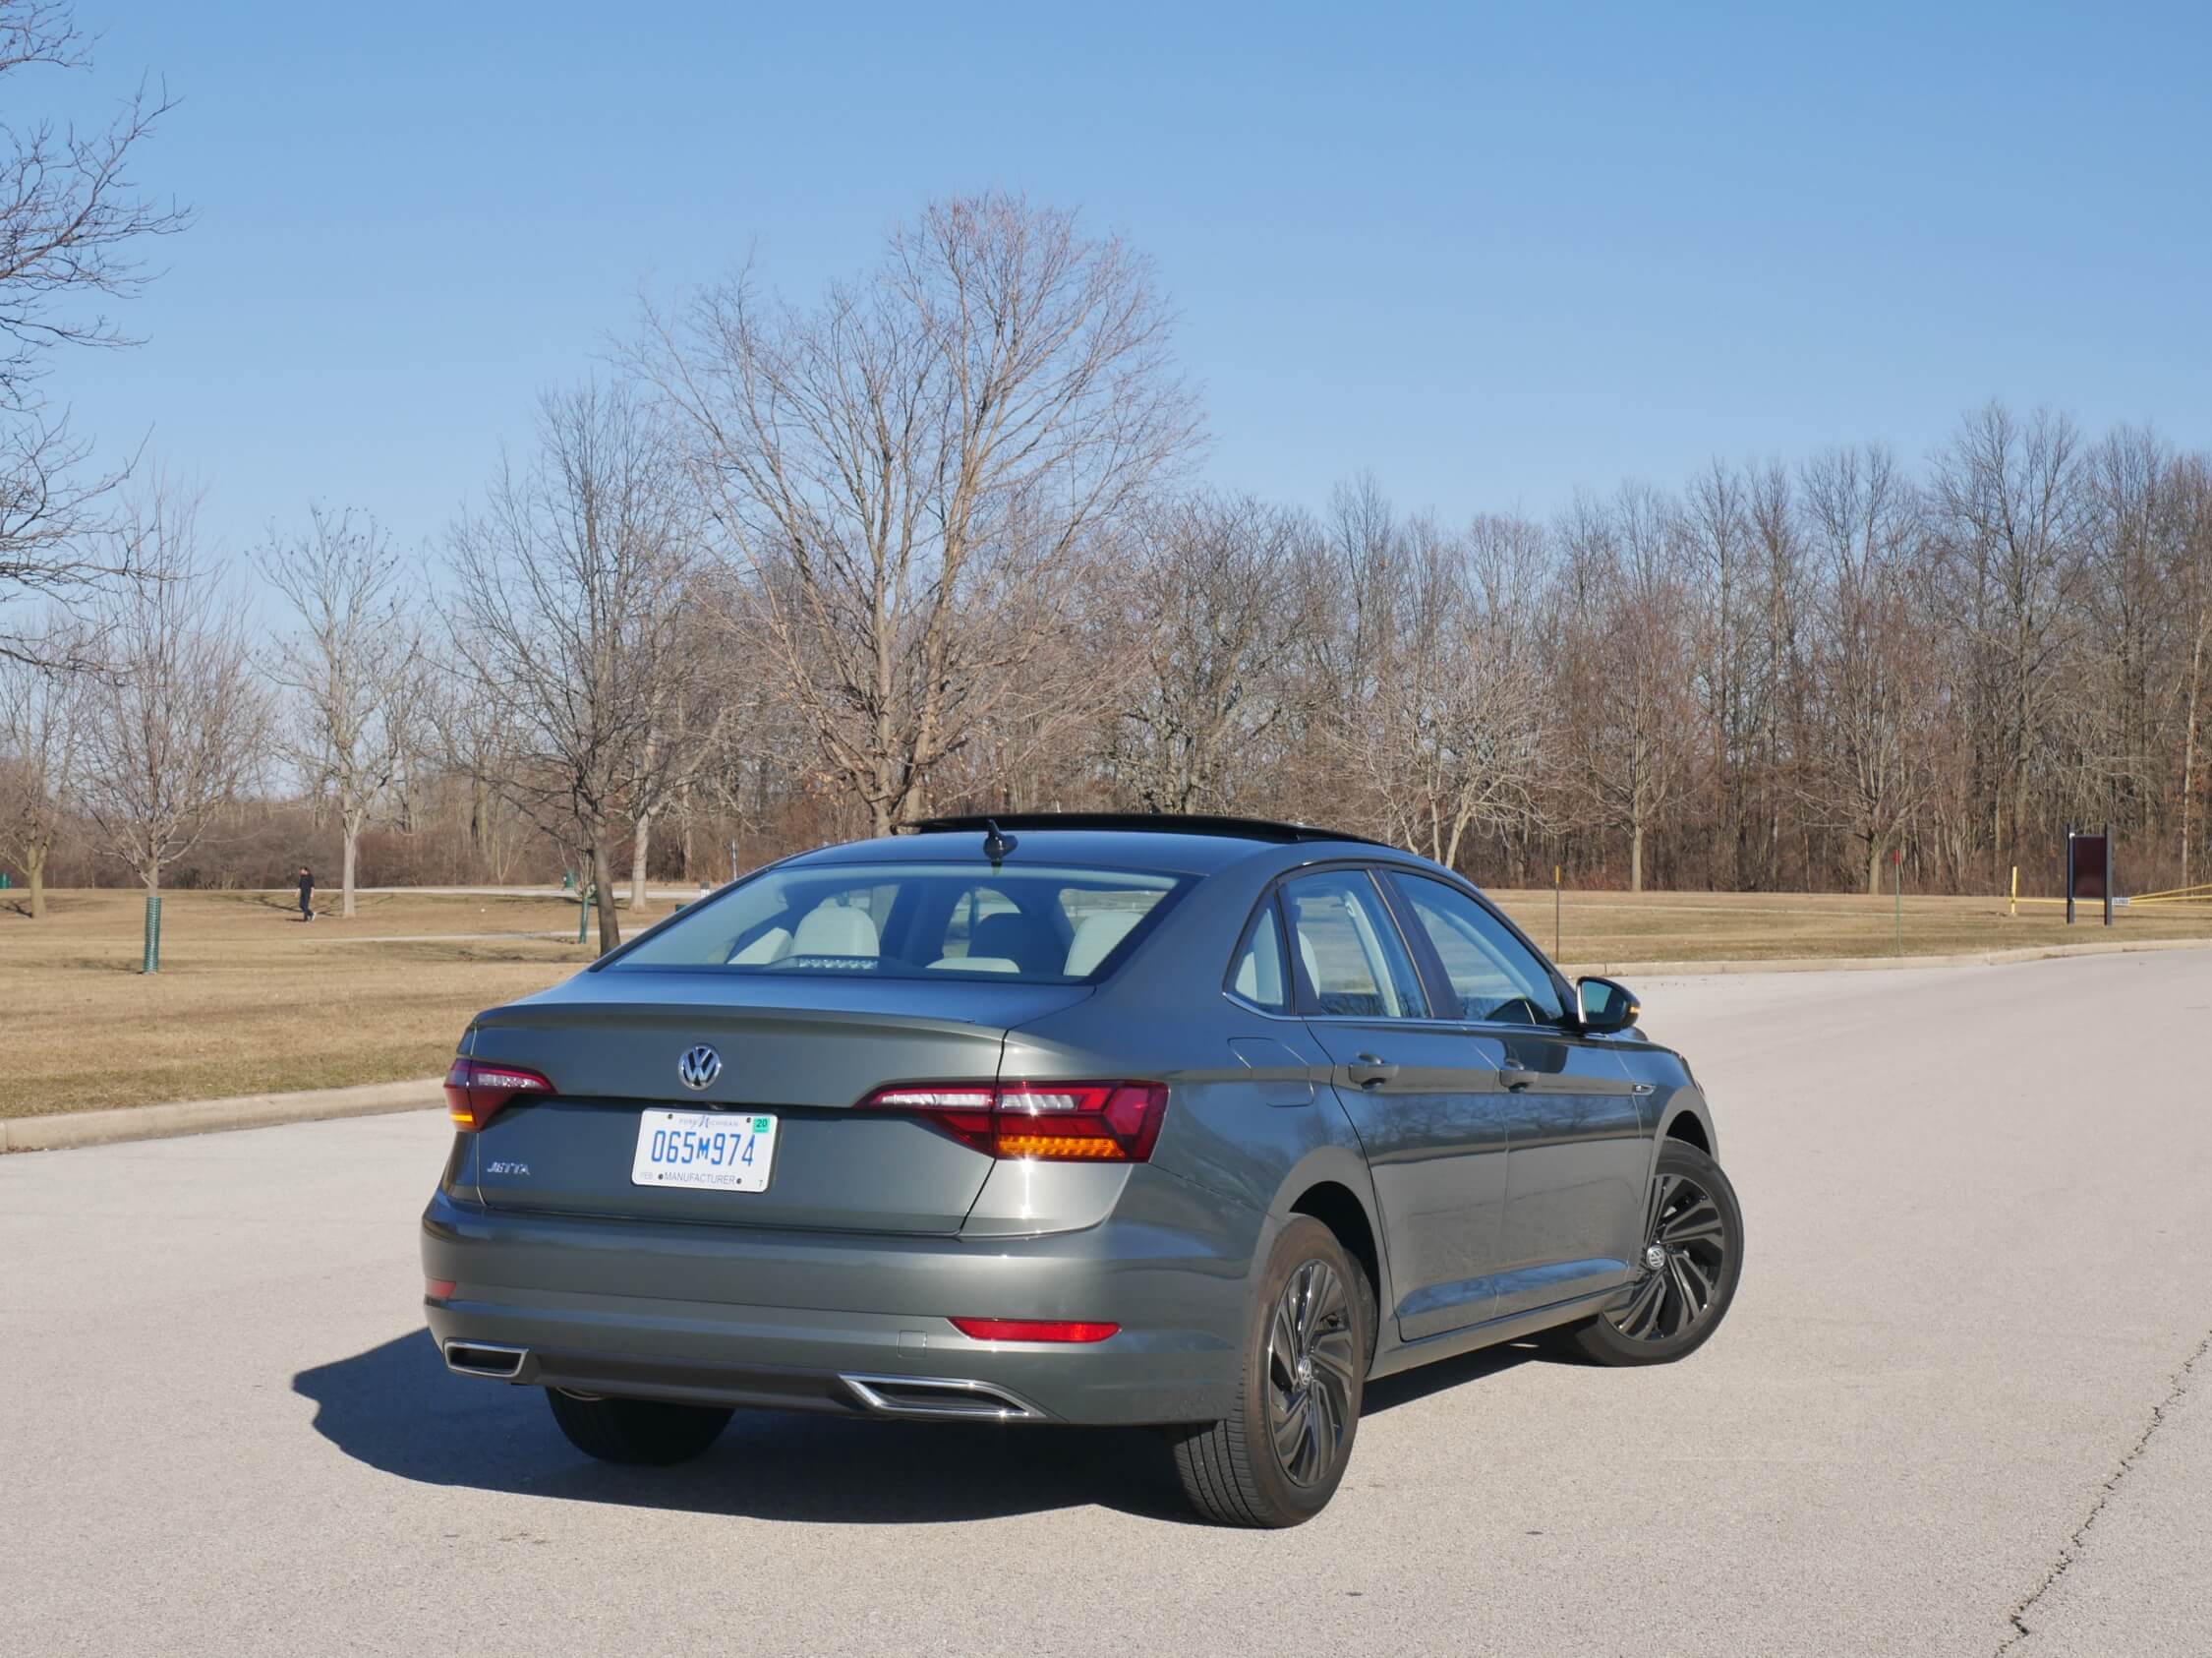 2019 Volkswagen Jetta SEL Premium: More prominent upper and lower body creasing flows to near fastback rear deck.